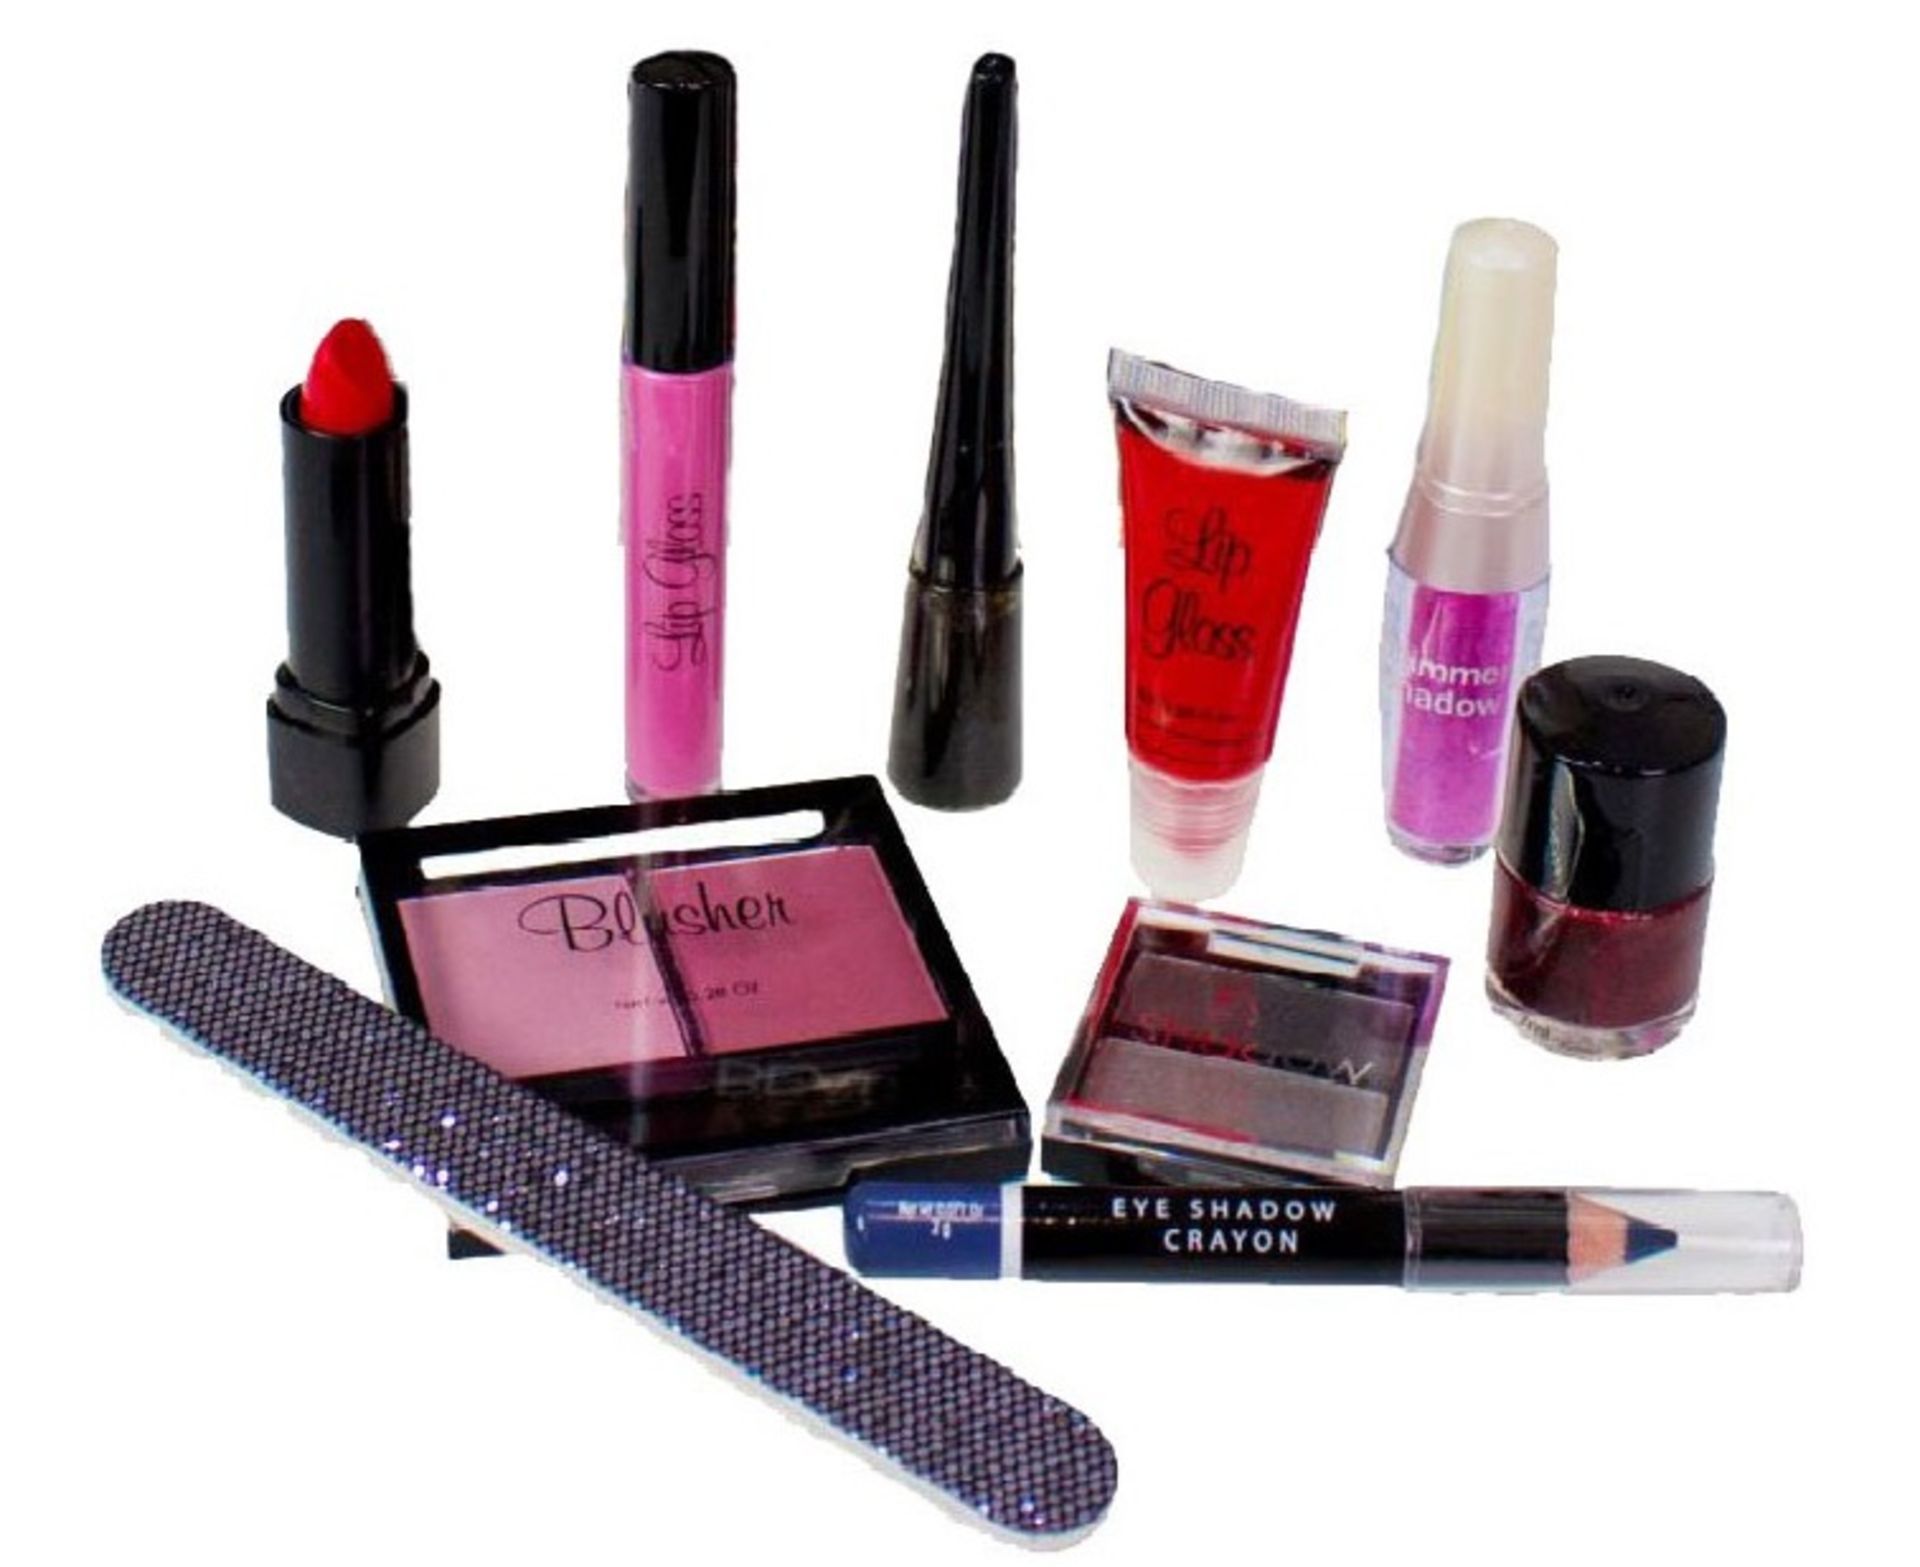 V *TRADE QTY* Brand New Ten Beauty Product Selection in Gift Bag (Contents vary) X 4 YOUR BID